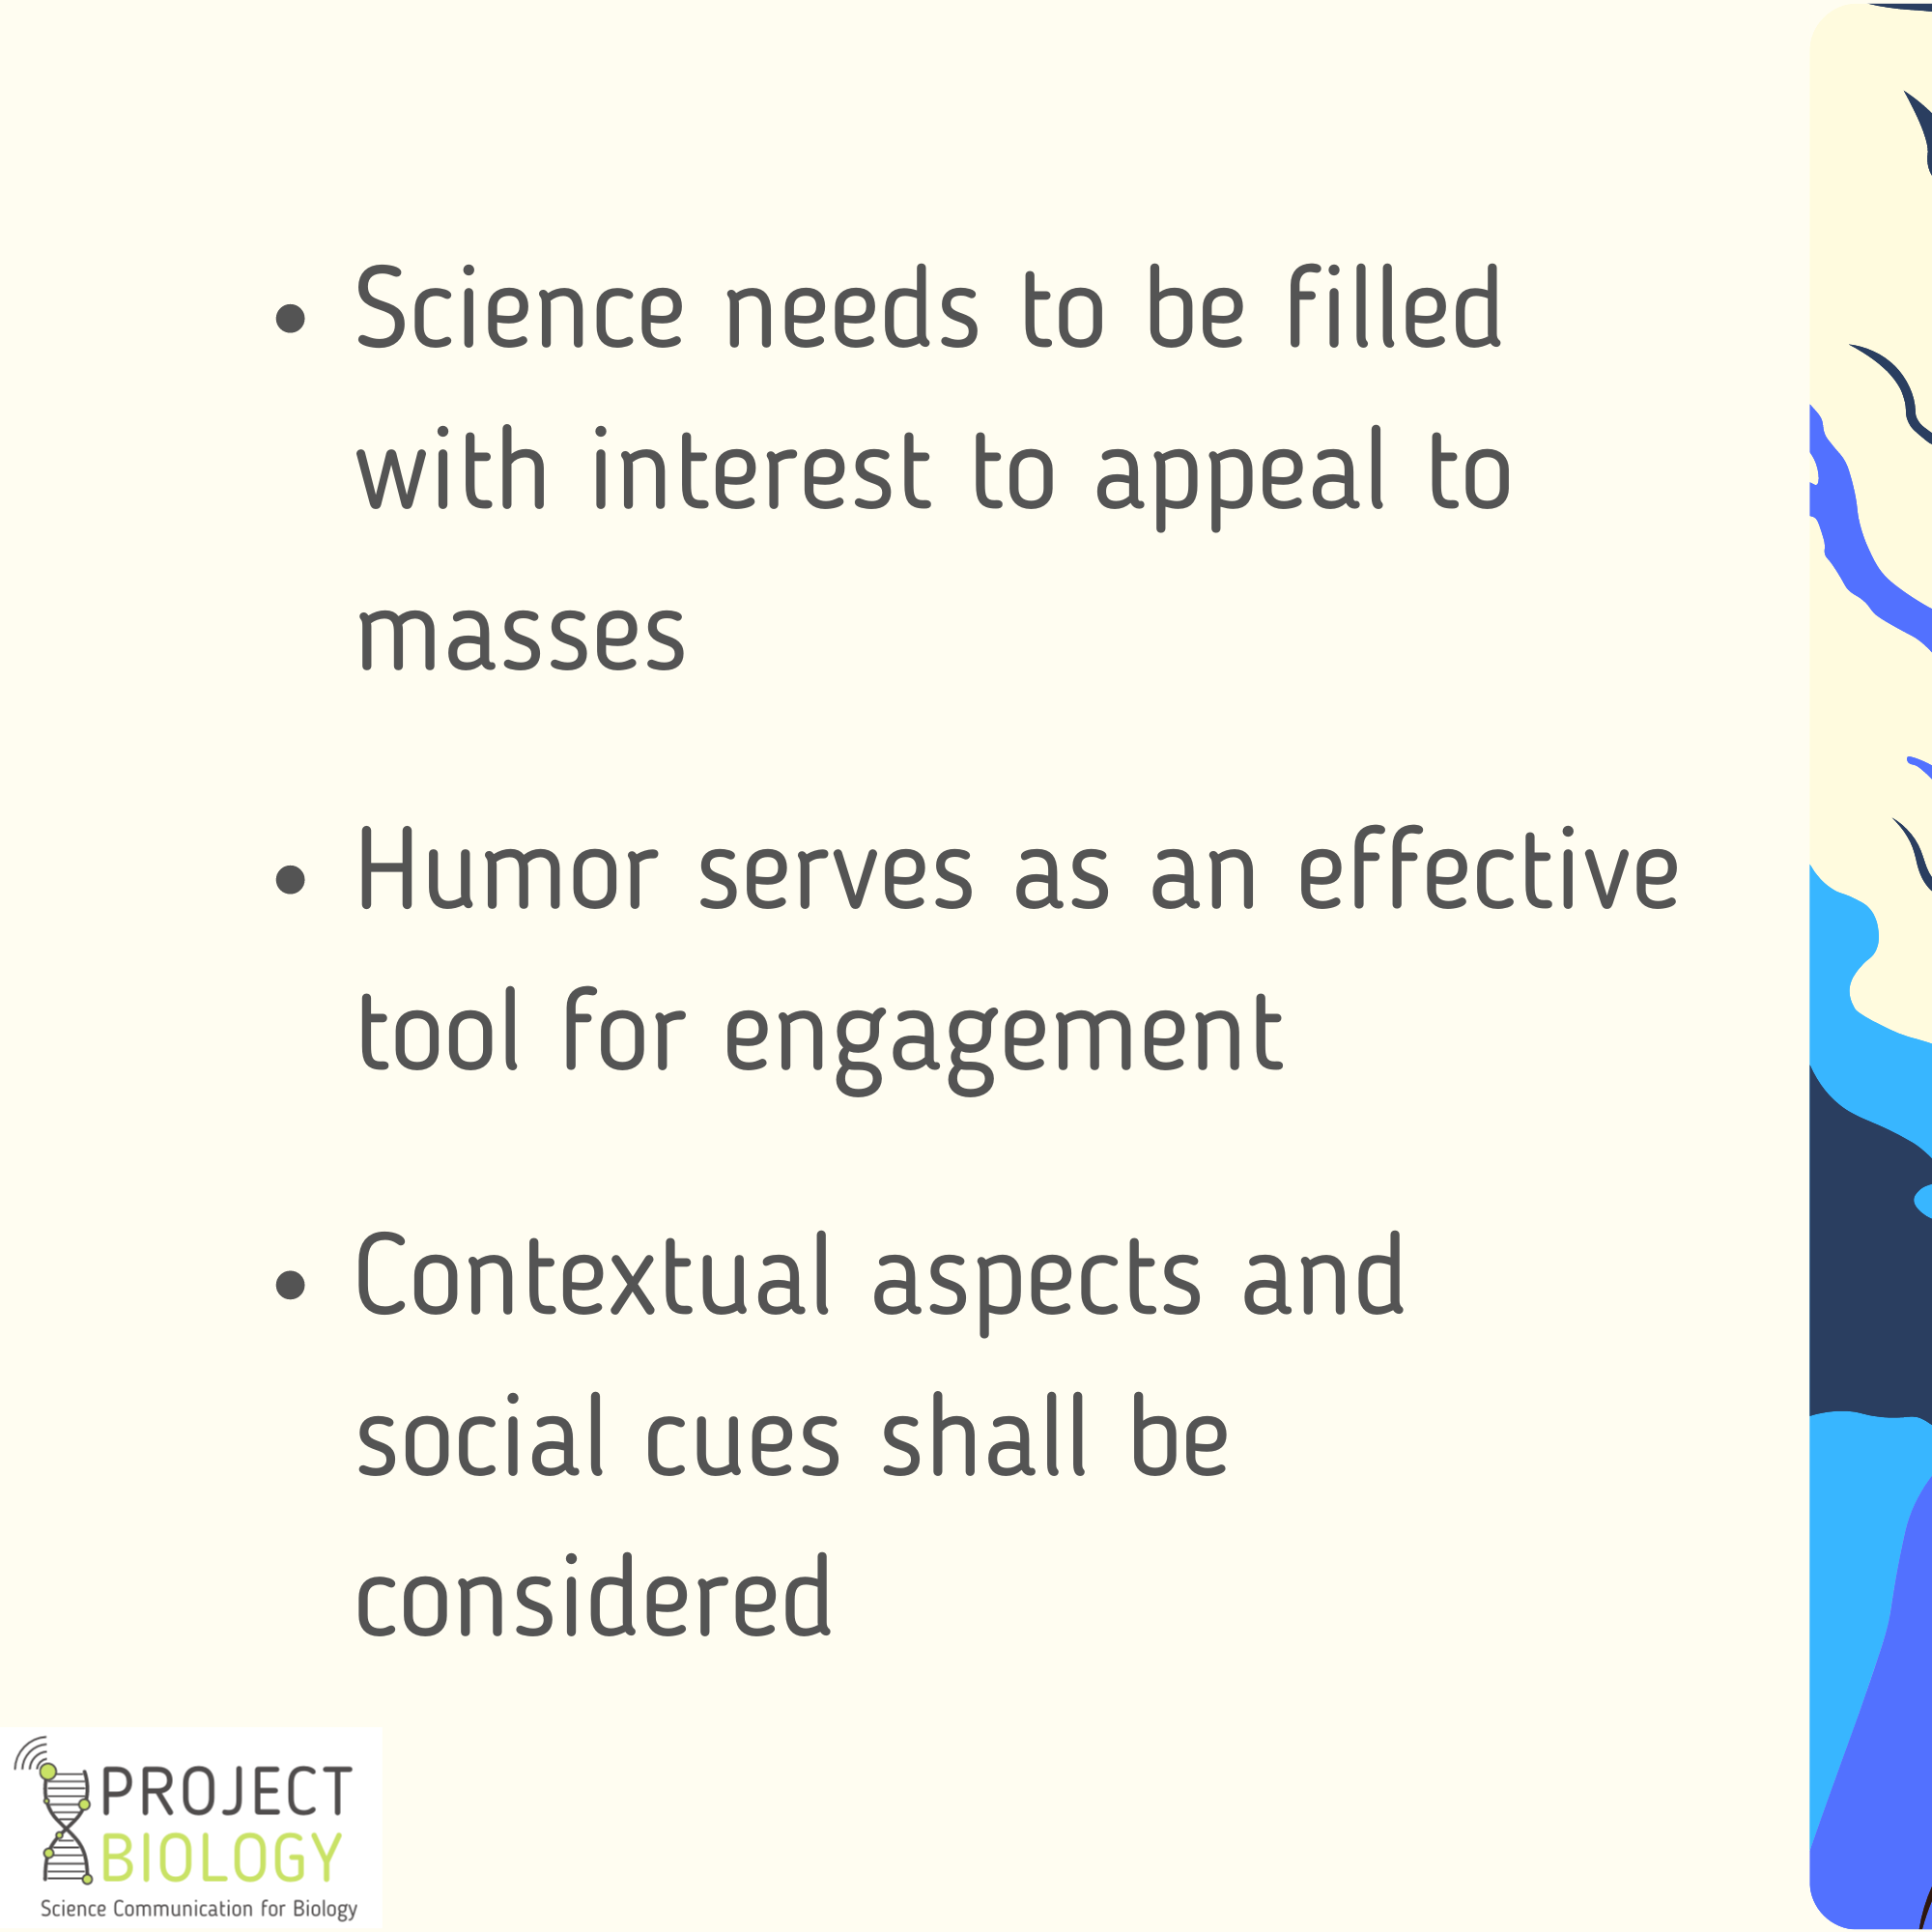 Can humor help engage audiences in scicomm?